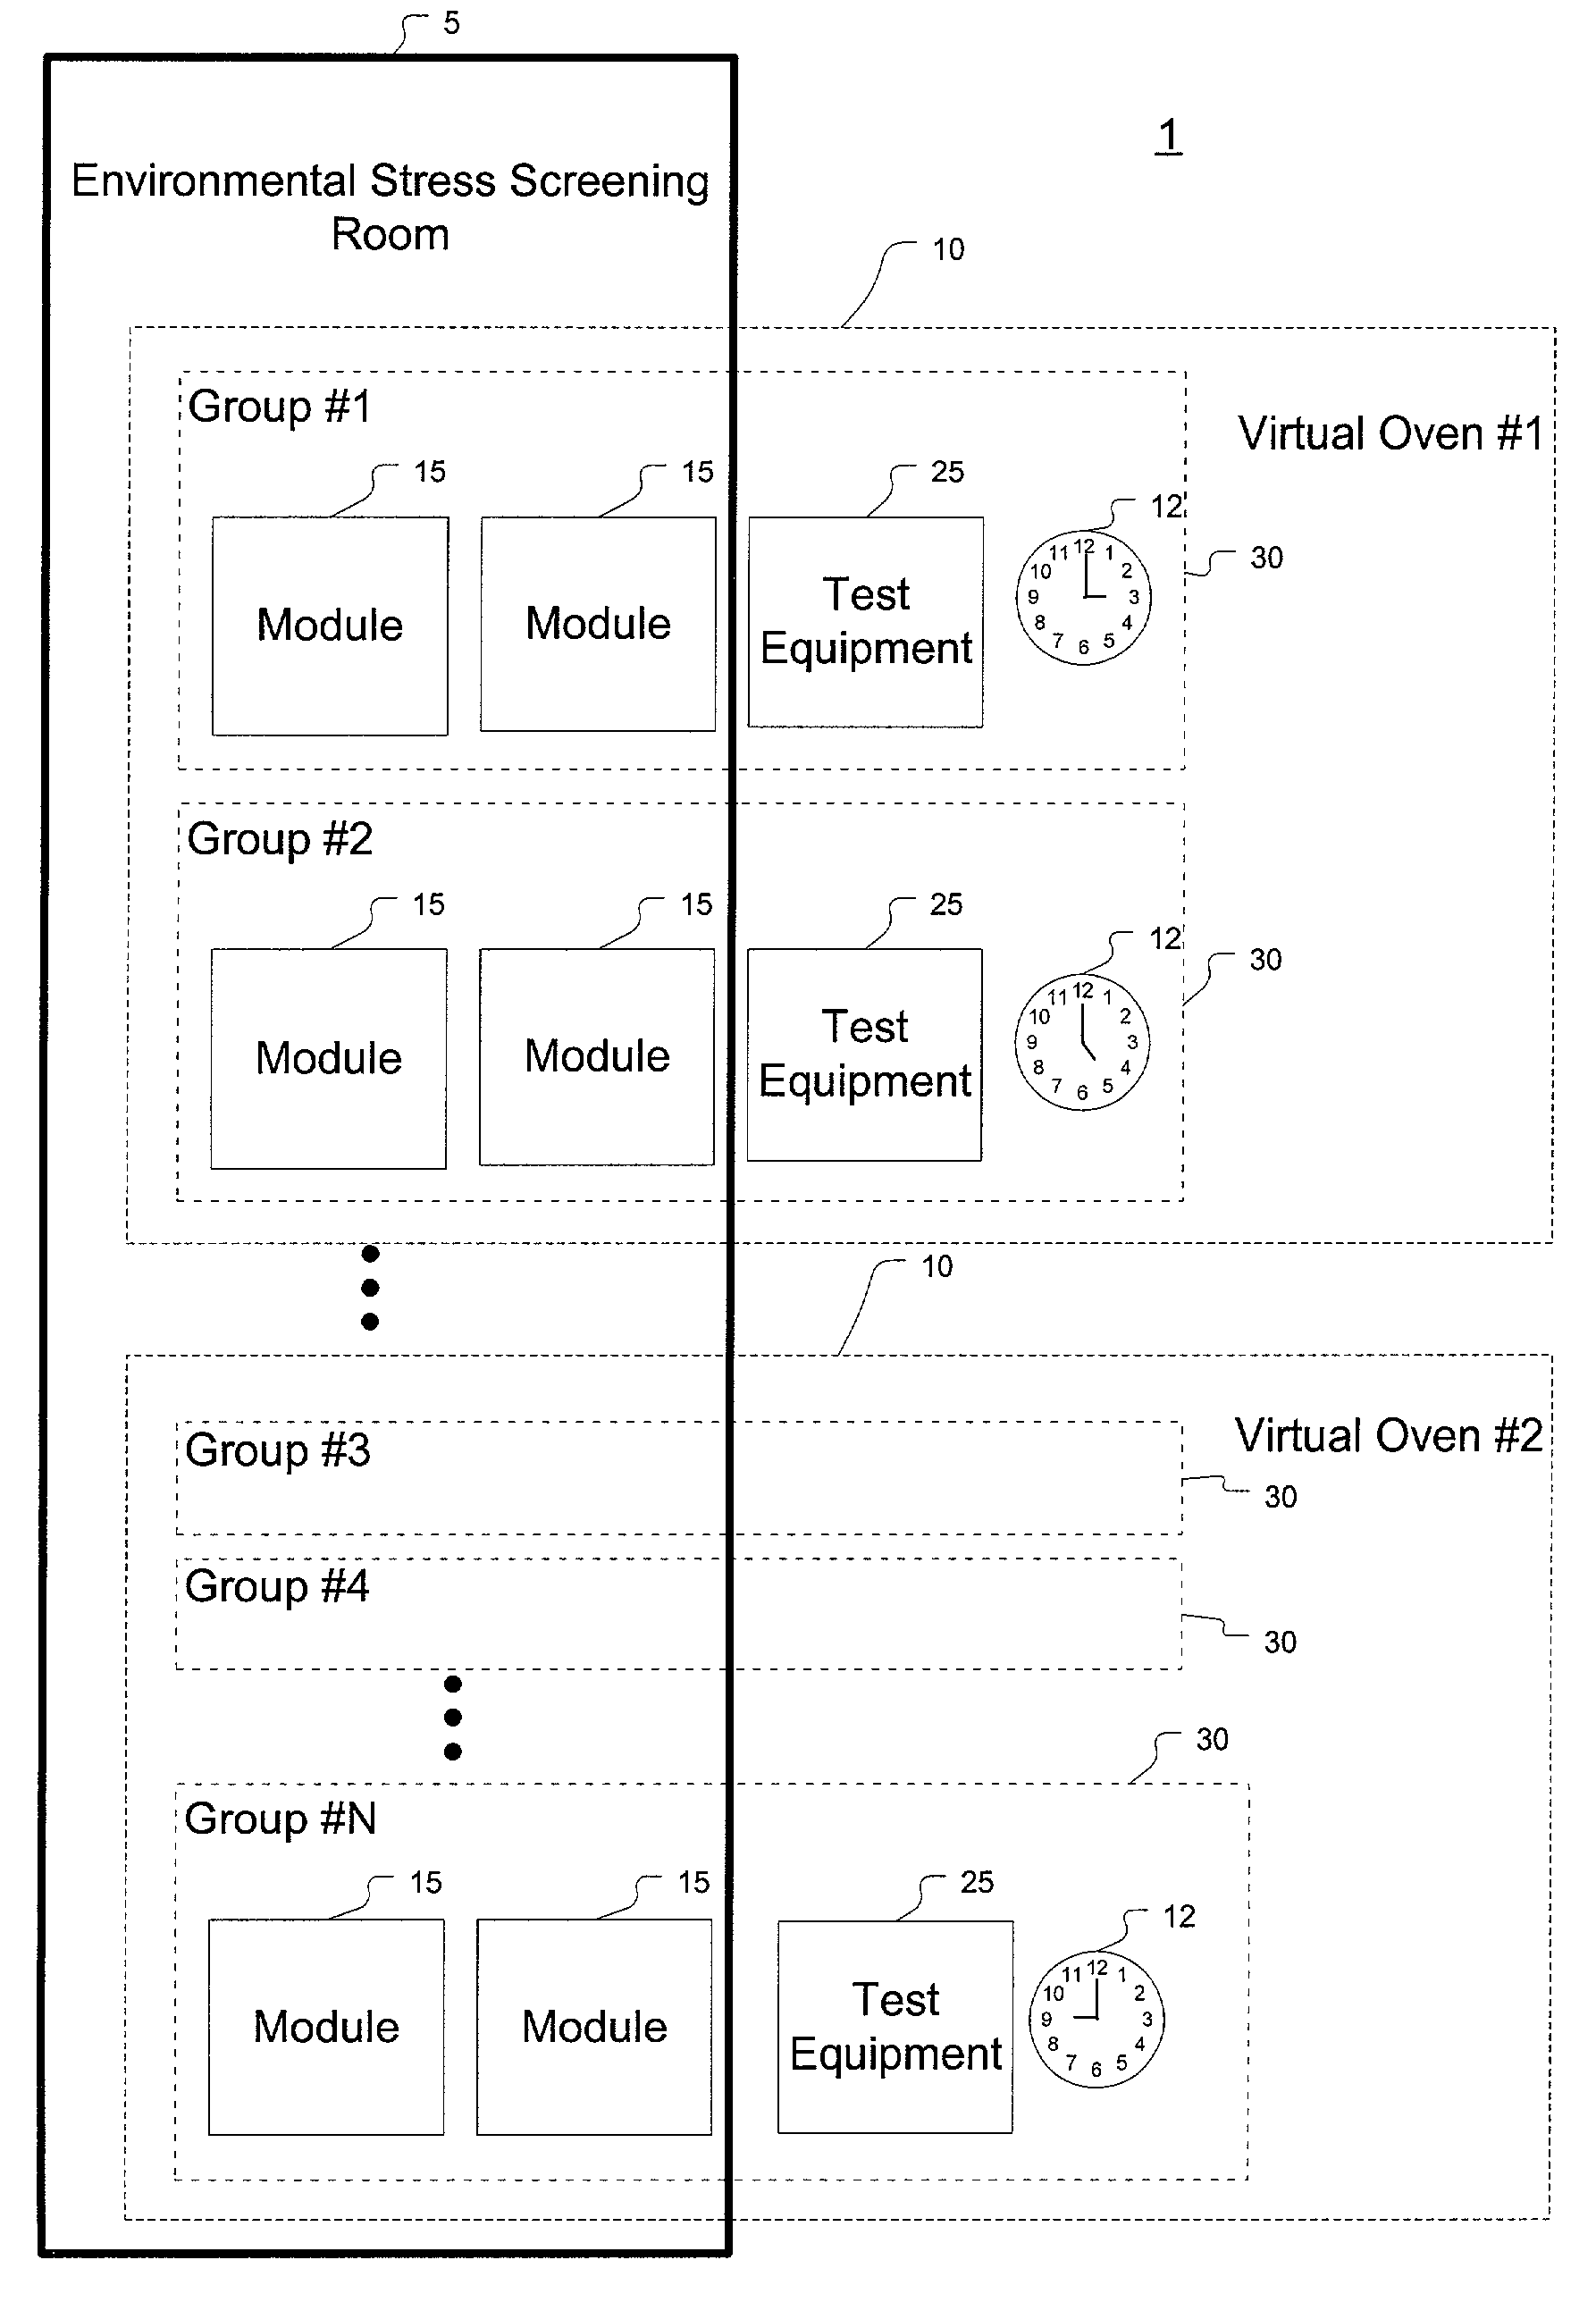 Stress-test information database structure and method of use